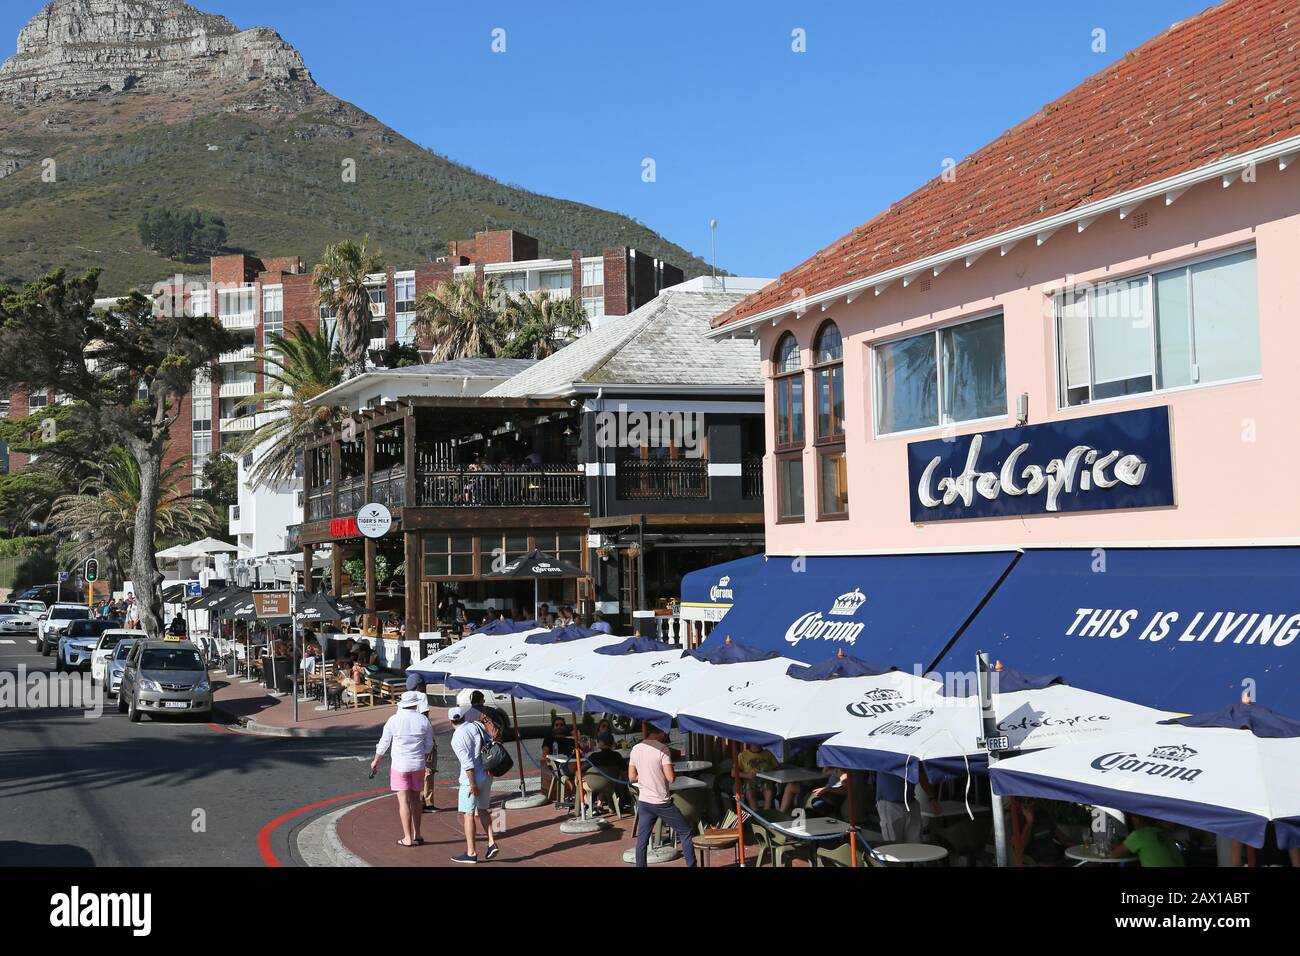 Tiger's Milk and Cafe Caprice, Victoria Street, Camps Bay, Cape Town, Table Bay, Western Cape Province, South Africa, Africa Stock Photo